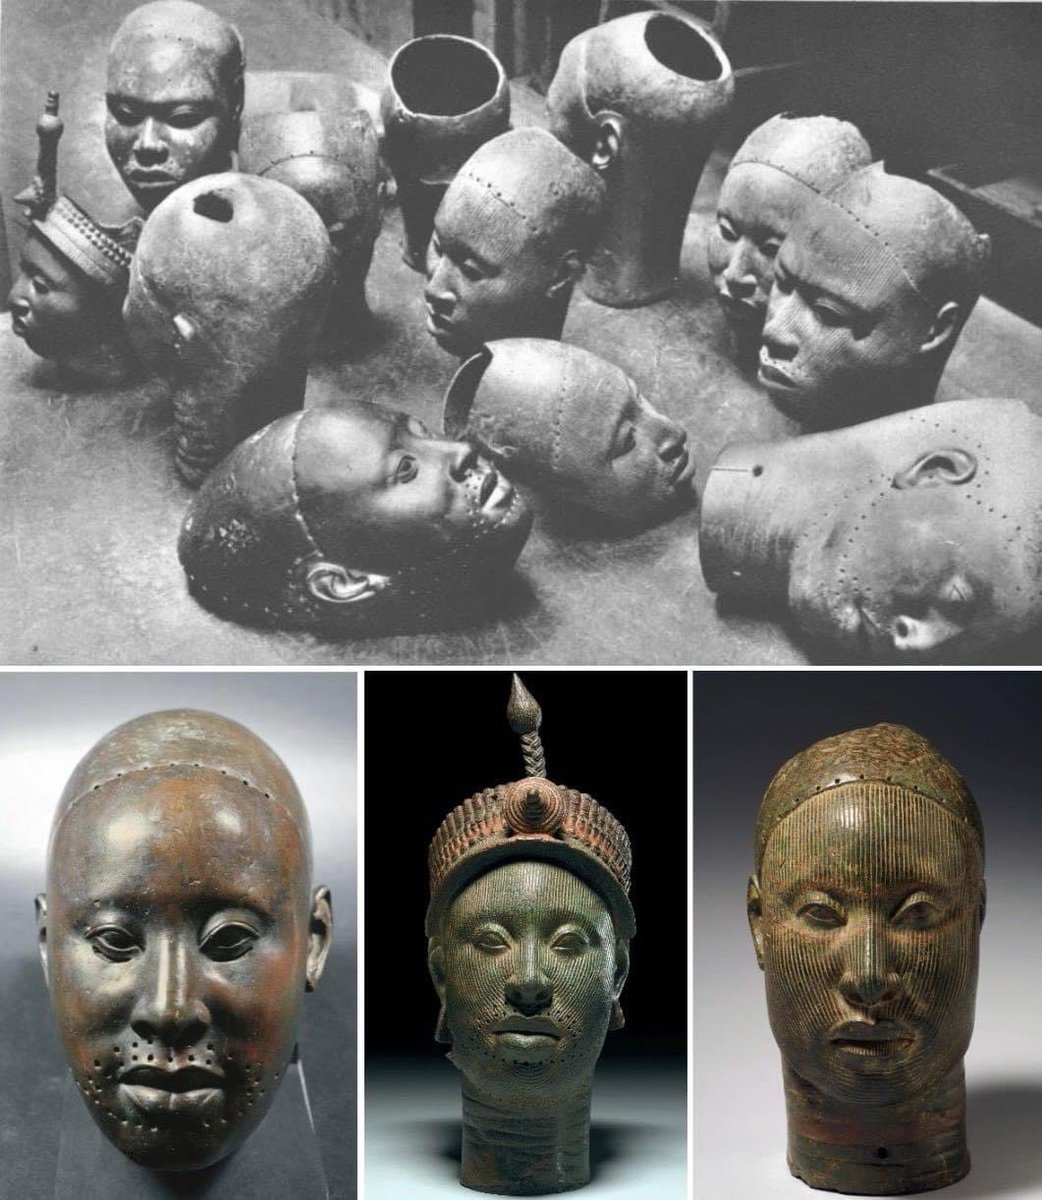 In 1938, 17 brass and copper heads and the upper half of a brass figure (dated to the 14th-15th century CE) were found by accident during house building works at Ile Ife now in Nigeria. The realism and sophisticated craftsmanship of the objects challenged Western conceptions of…